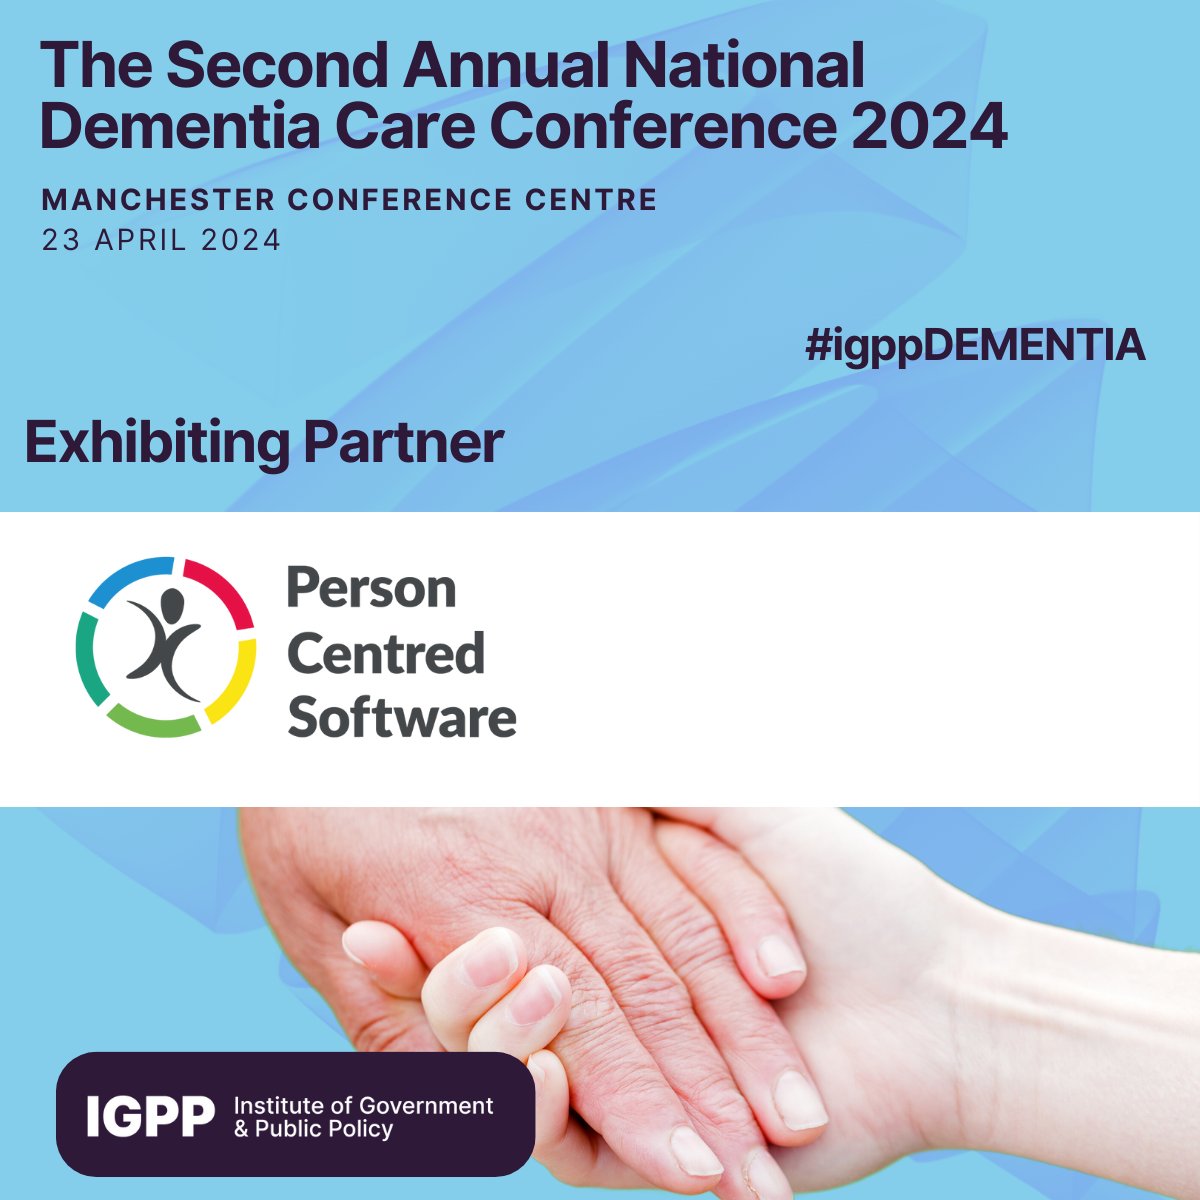 We are delighted to announce that Person Centred Software is an Exhibiting Partner at The Second Annual National Dementia Care Conference 2024.

Find more information here: hubs.ly/Q02trzZq0

#igppDEMENTIA #dementiacare #techfordementia #healthcaretechnology